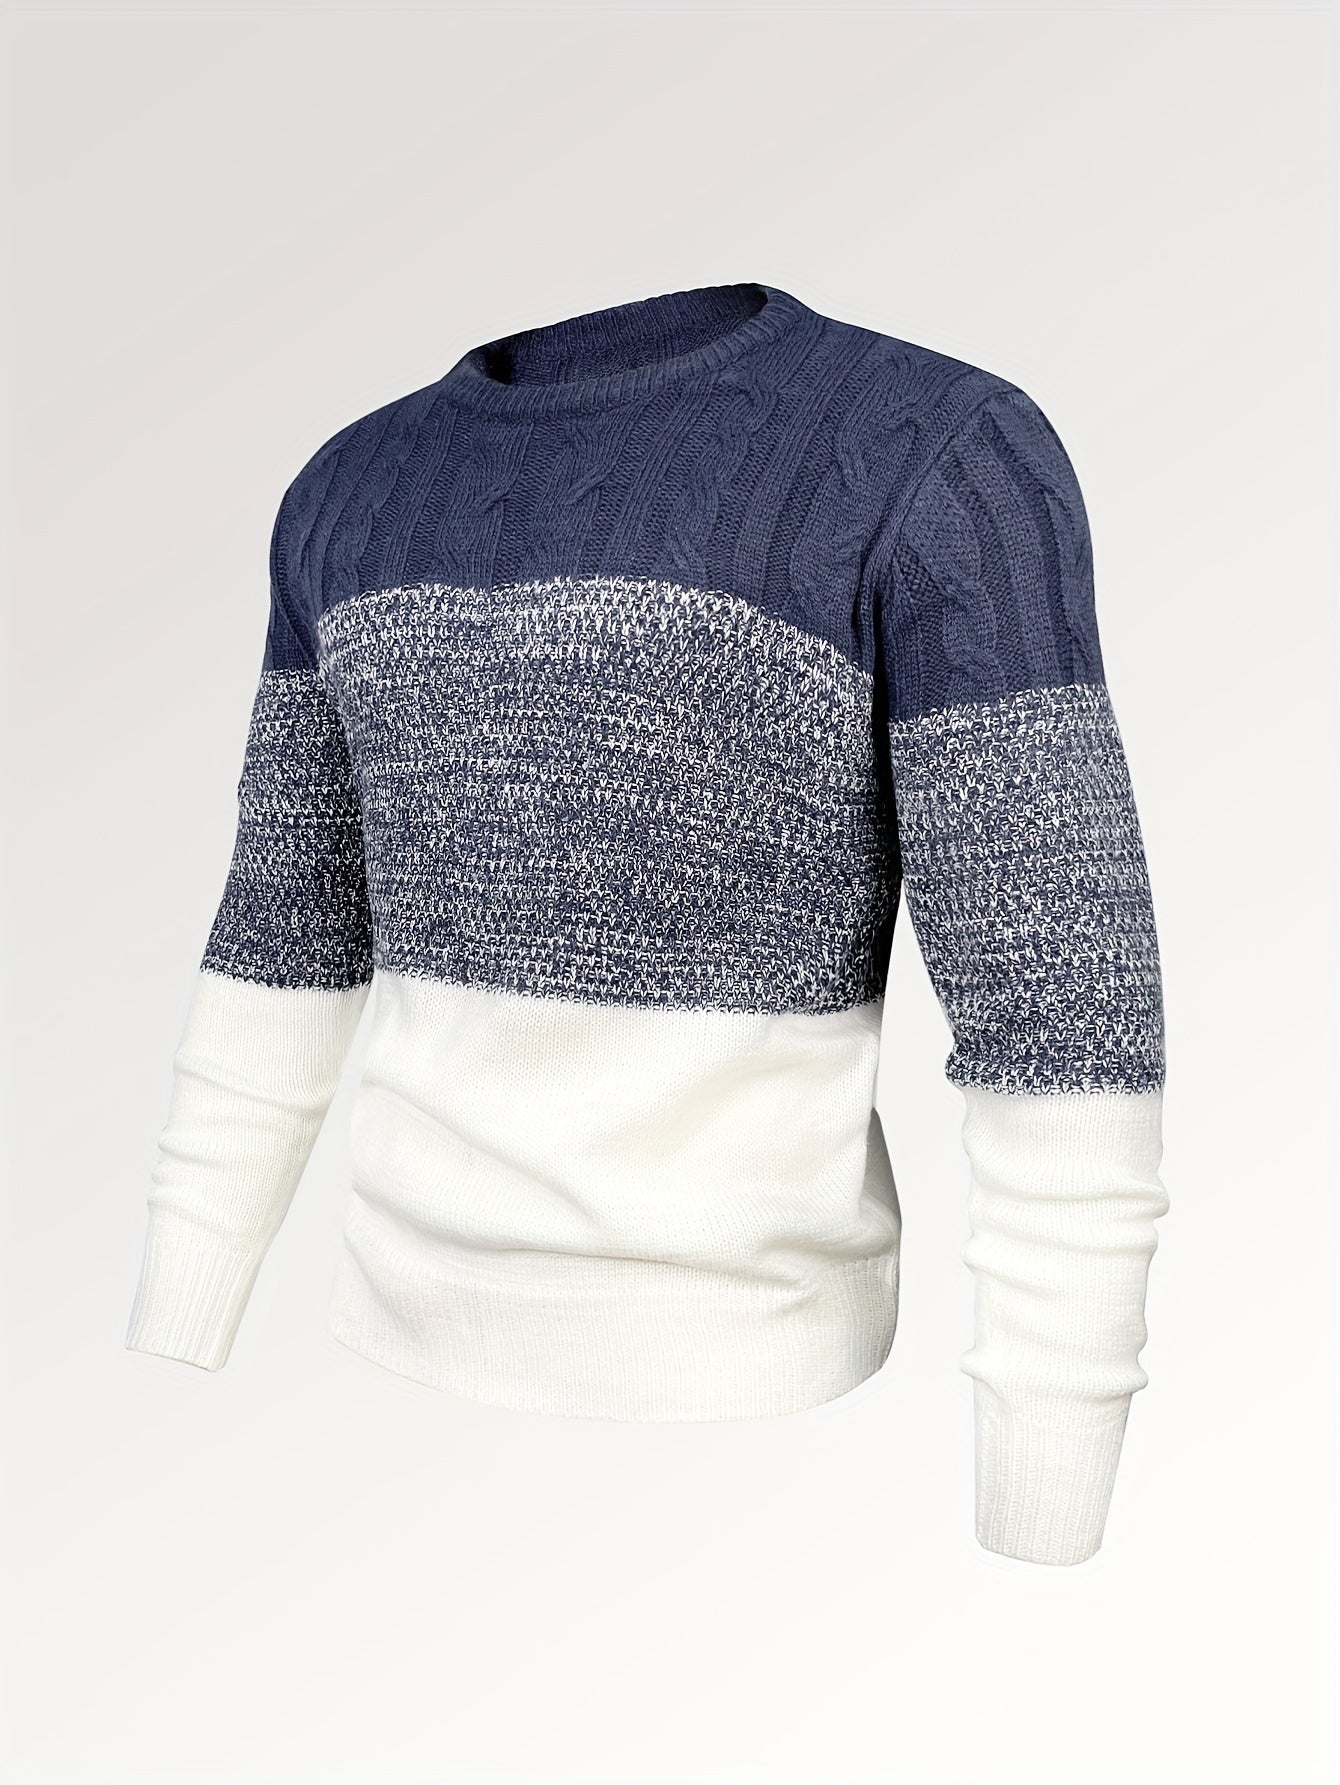 Foruwish - All Match Knitted Cable Sweater, Men's Casual Warm Slightly Stretch Crew Neck Pullover Sweater For Men Fall Winter